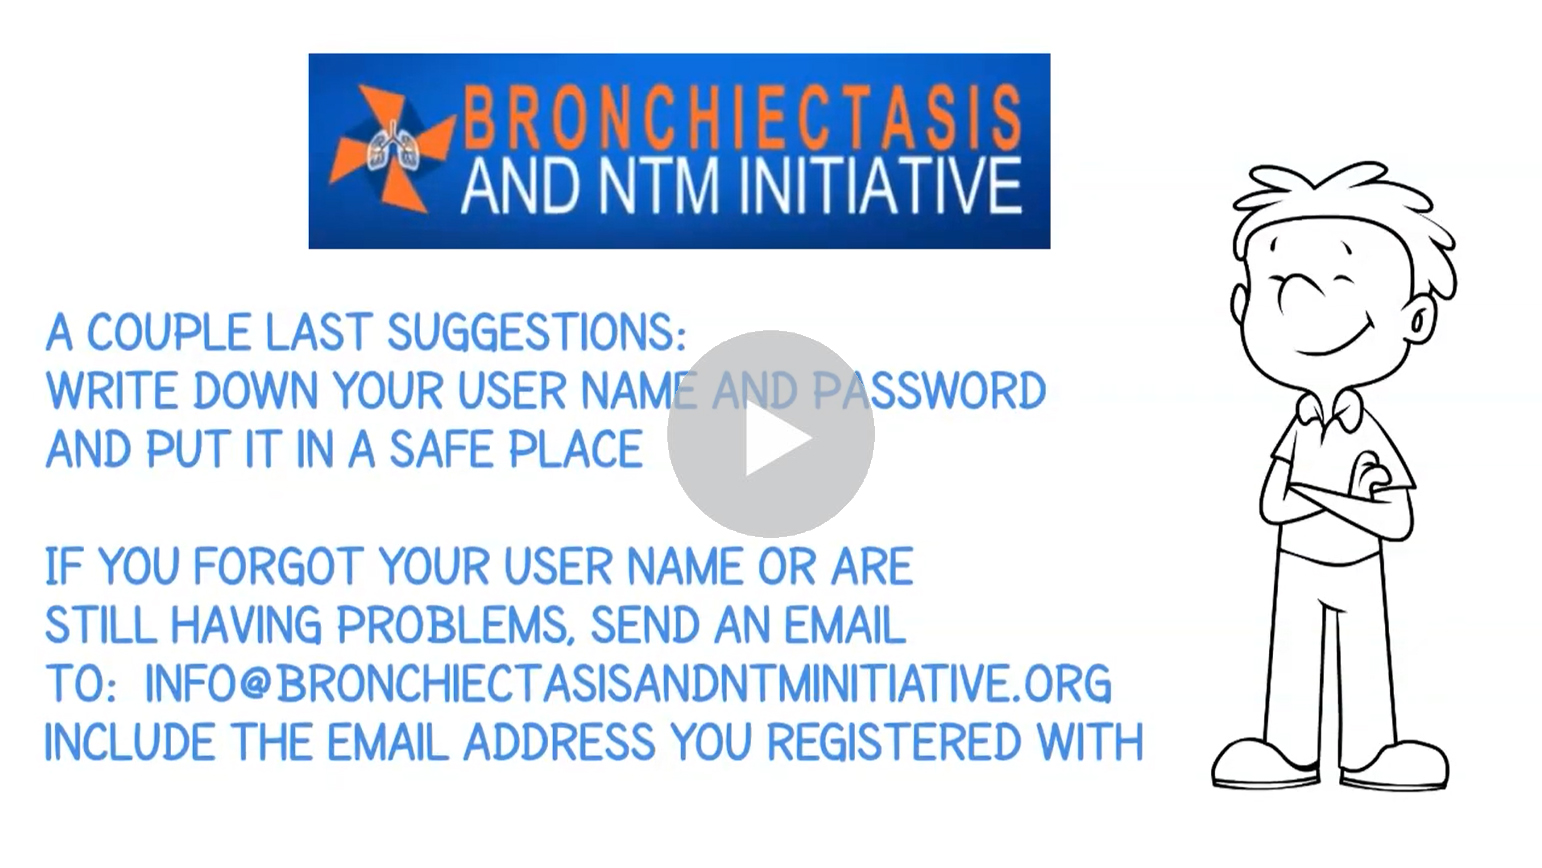 How to Reset a Forgotten Password. Click to watch the video.